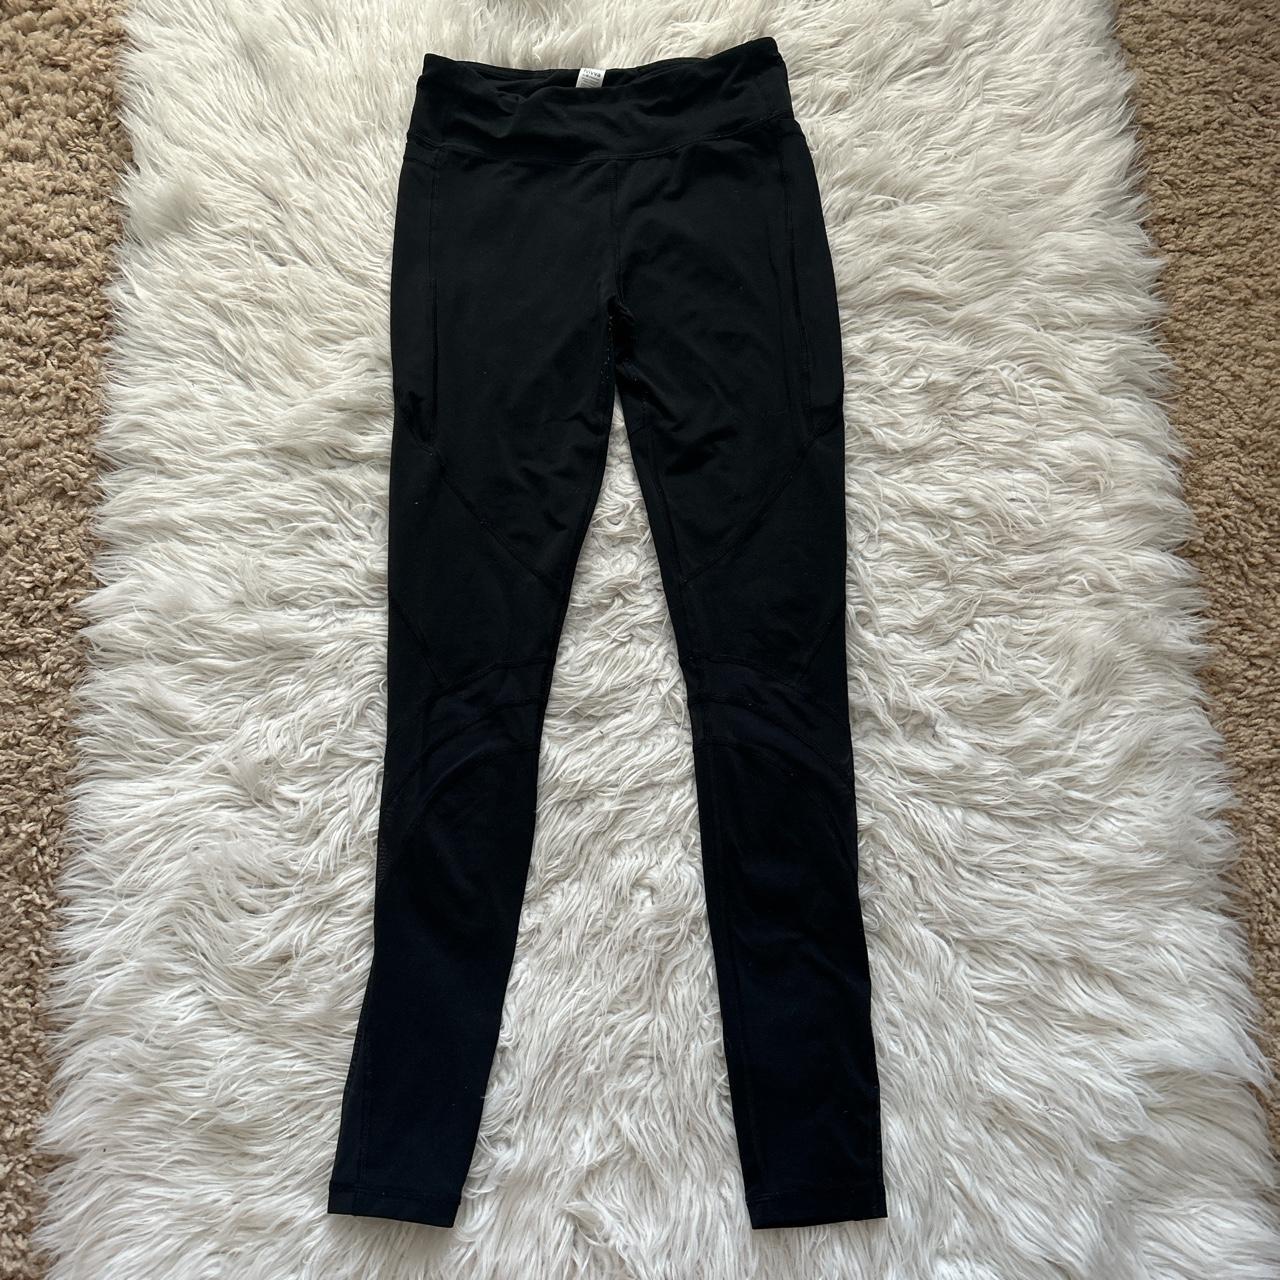 Ivivva leggings with mesh detail and pockets Some - Depop